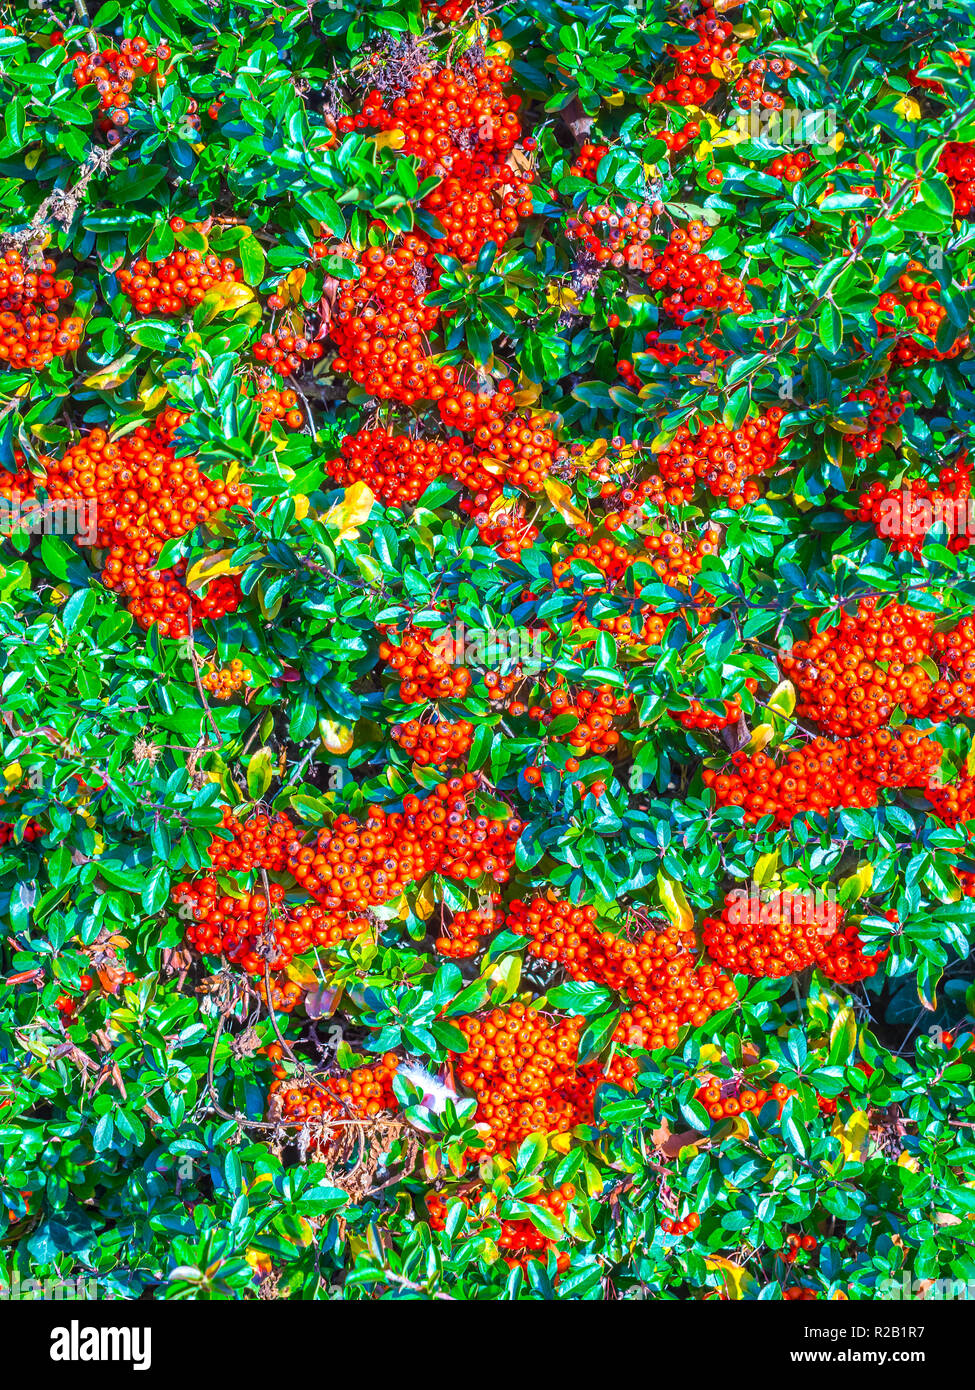 Pyracantha / Firethorn hedge with red berries (pomes) - France. Stock Photo